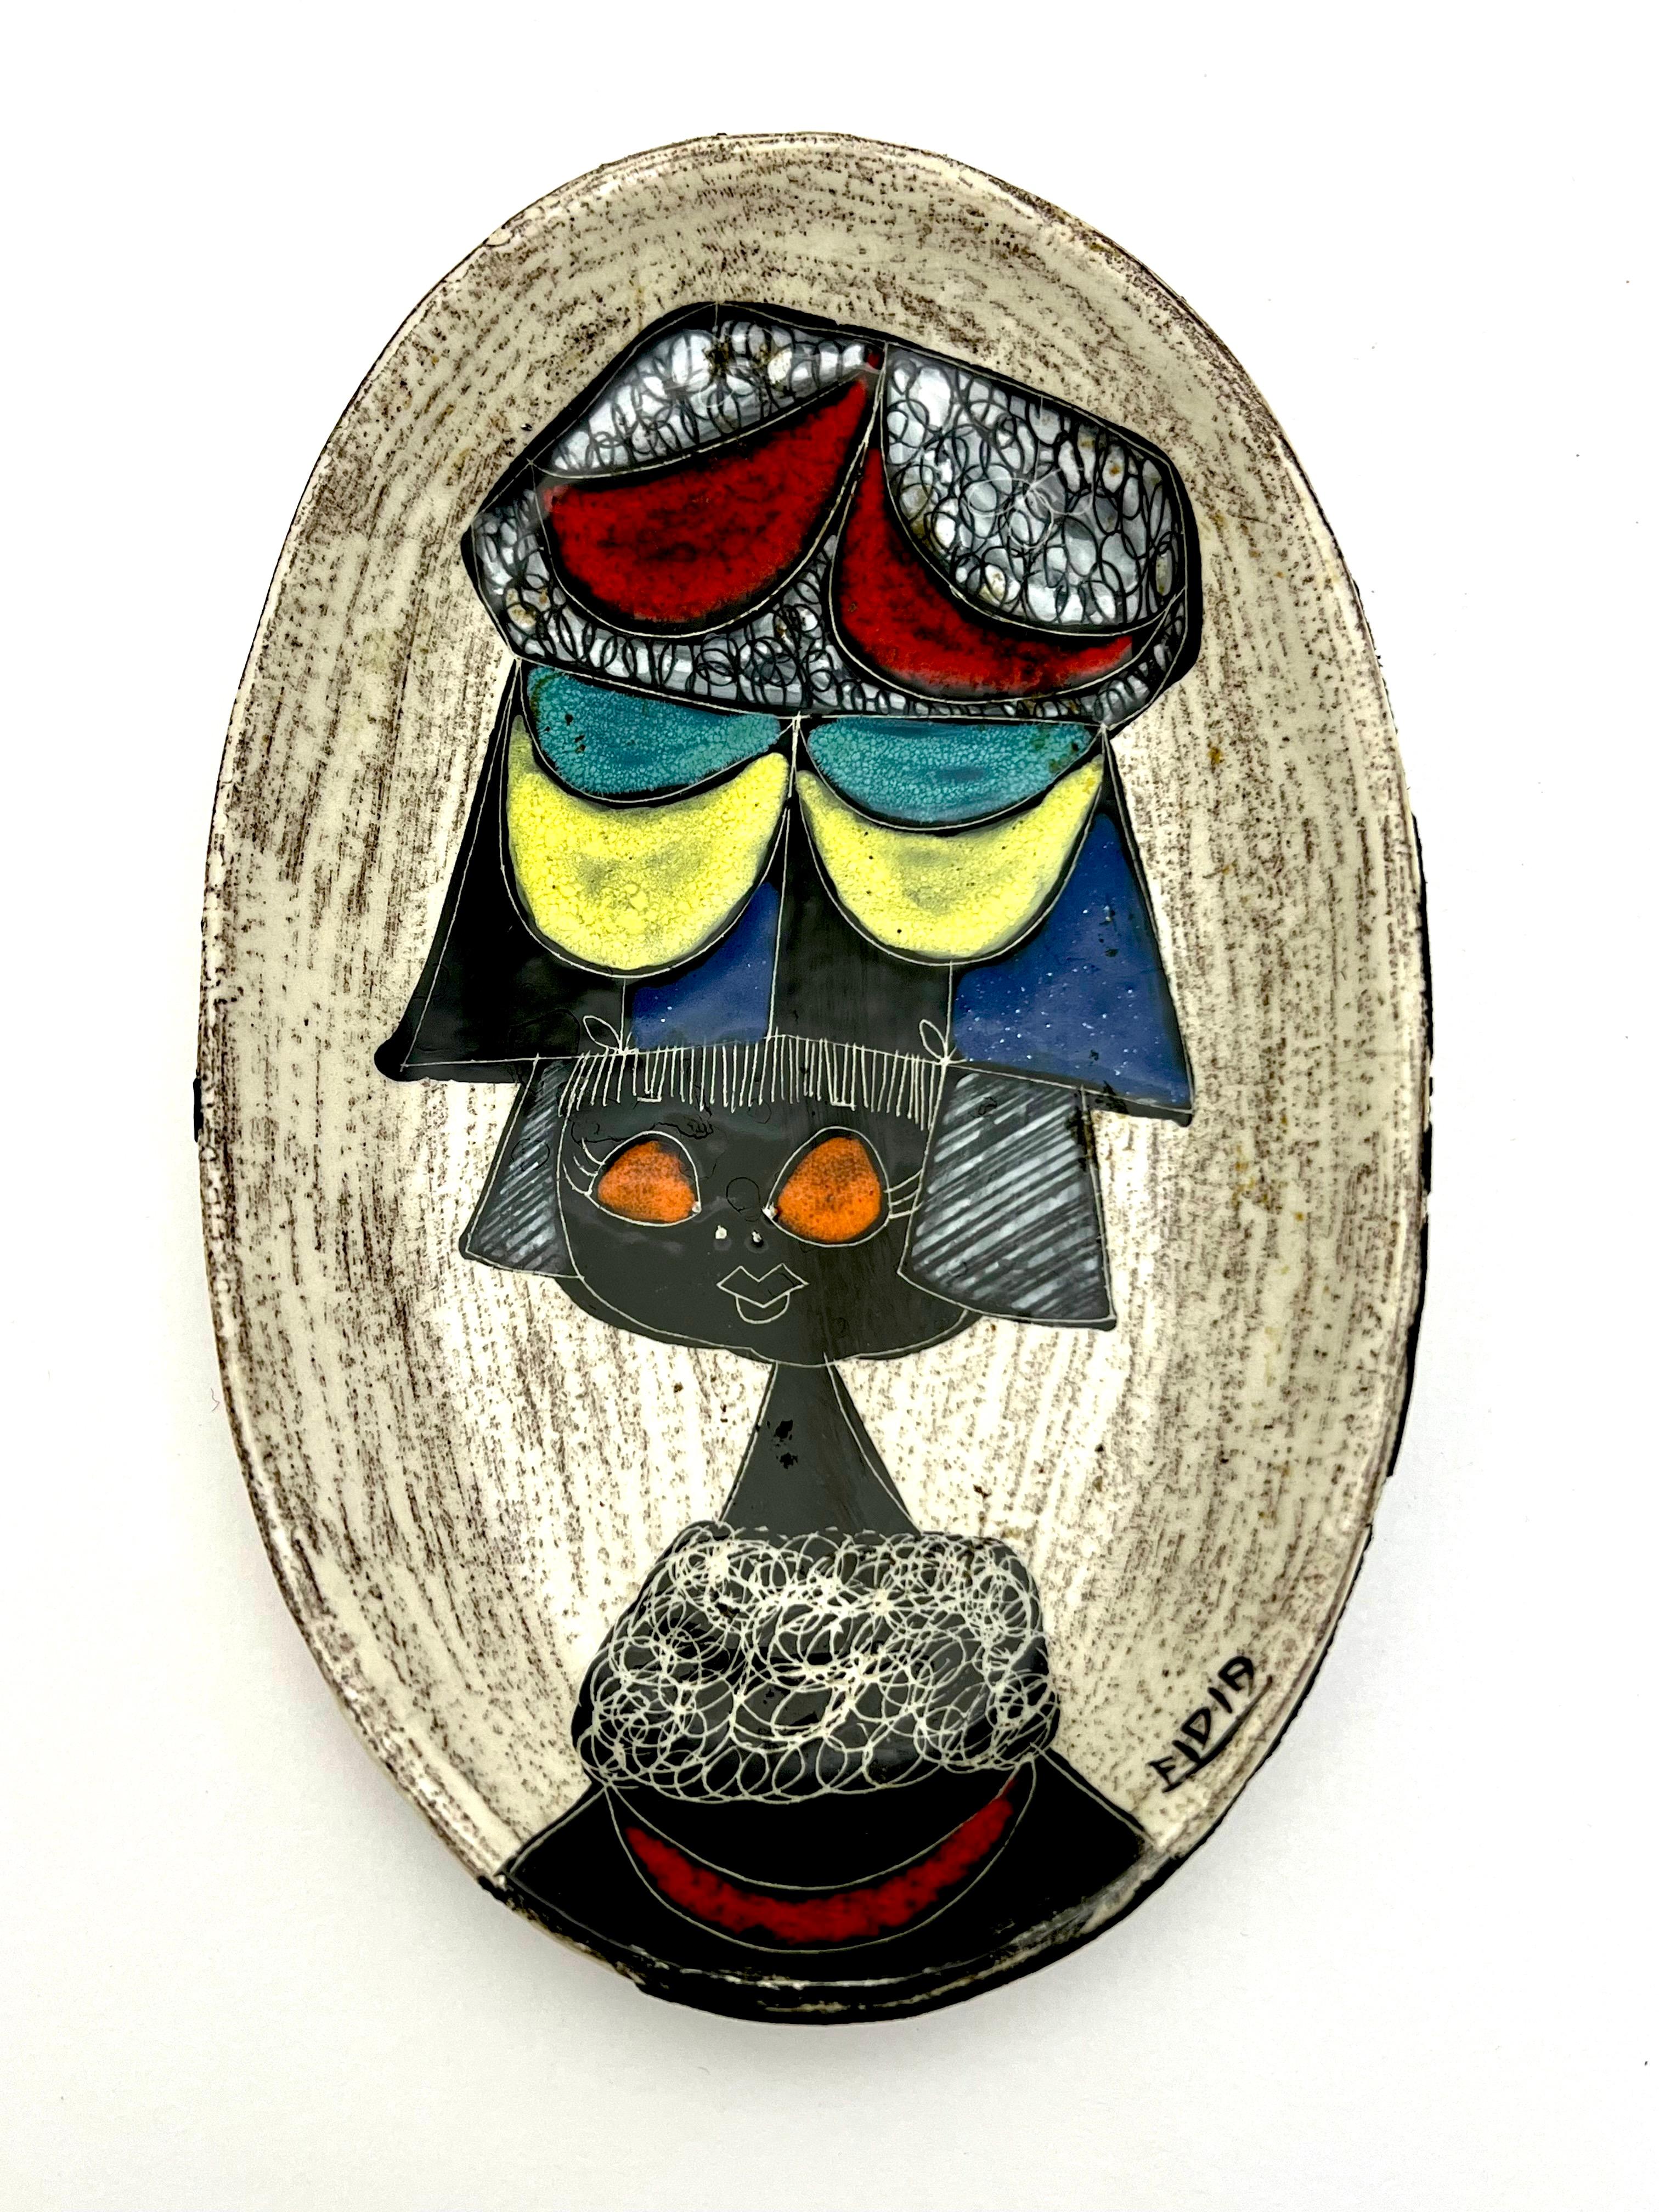 Fabulous Italian hand painted figural bowl and tray by Fidia. These big eyed girls are in the style of Fantoni. Bound in leather on the back these are great midcentury accents that the Italian masters like Fornasetti and Fantoni mastered so